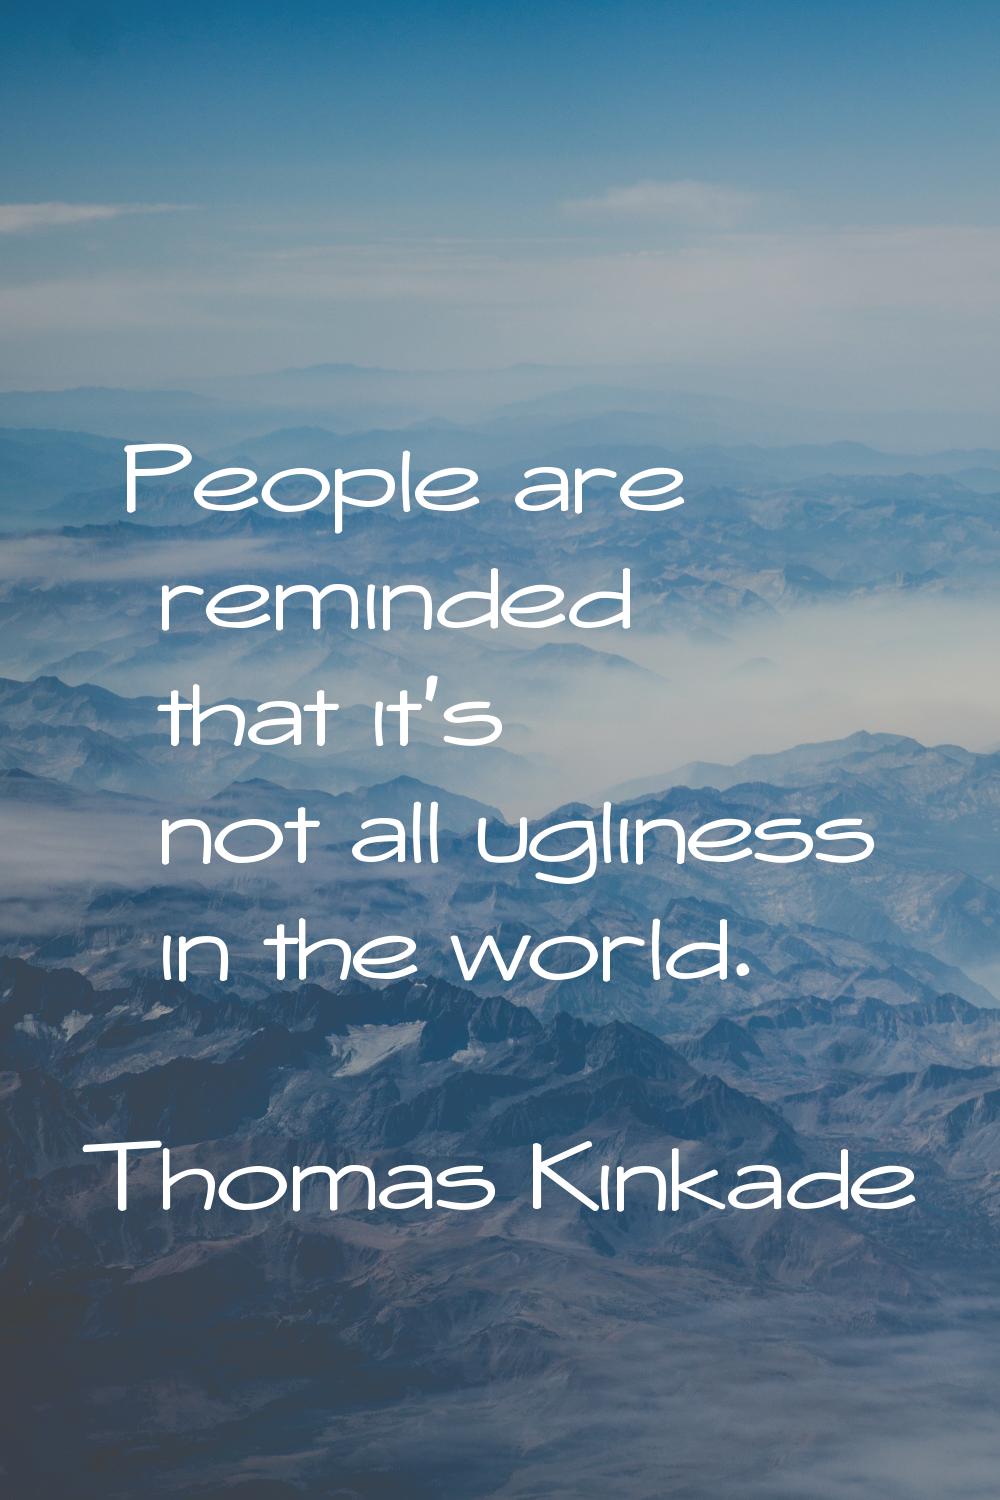 People are reminded that it's not all ugliness in the world.